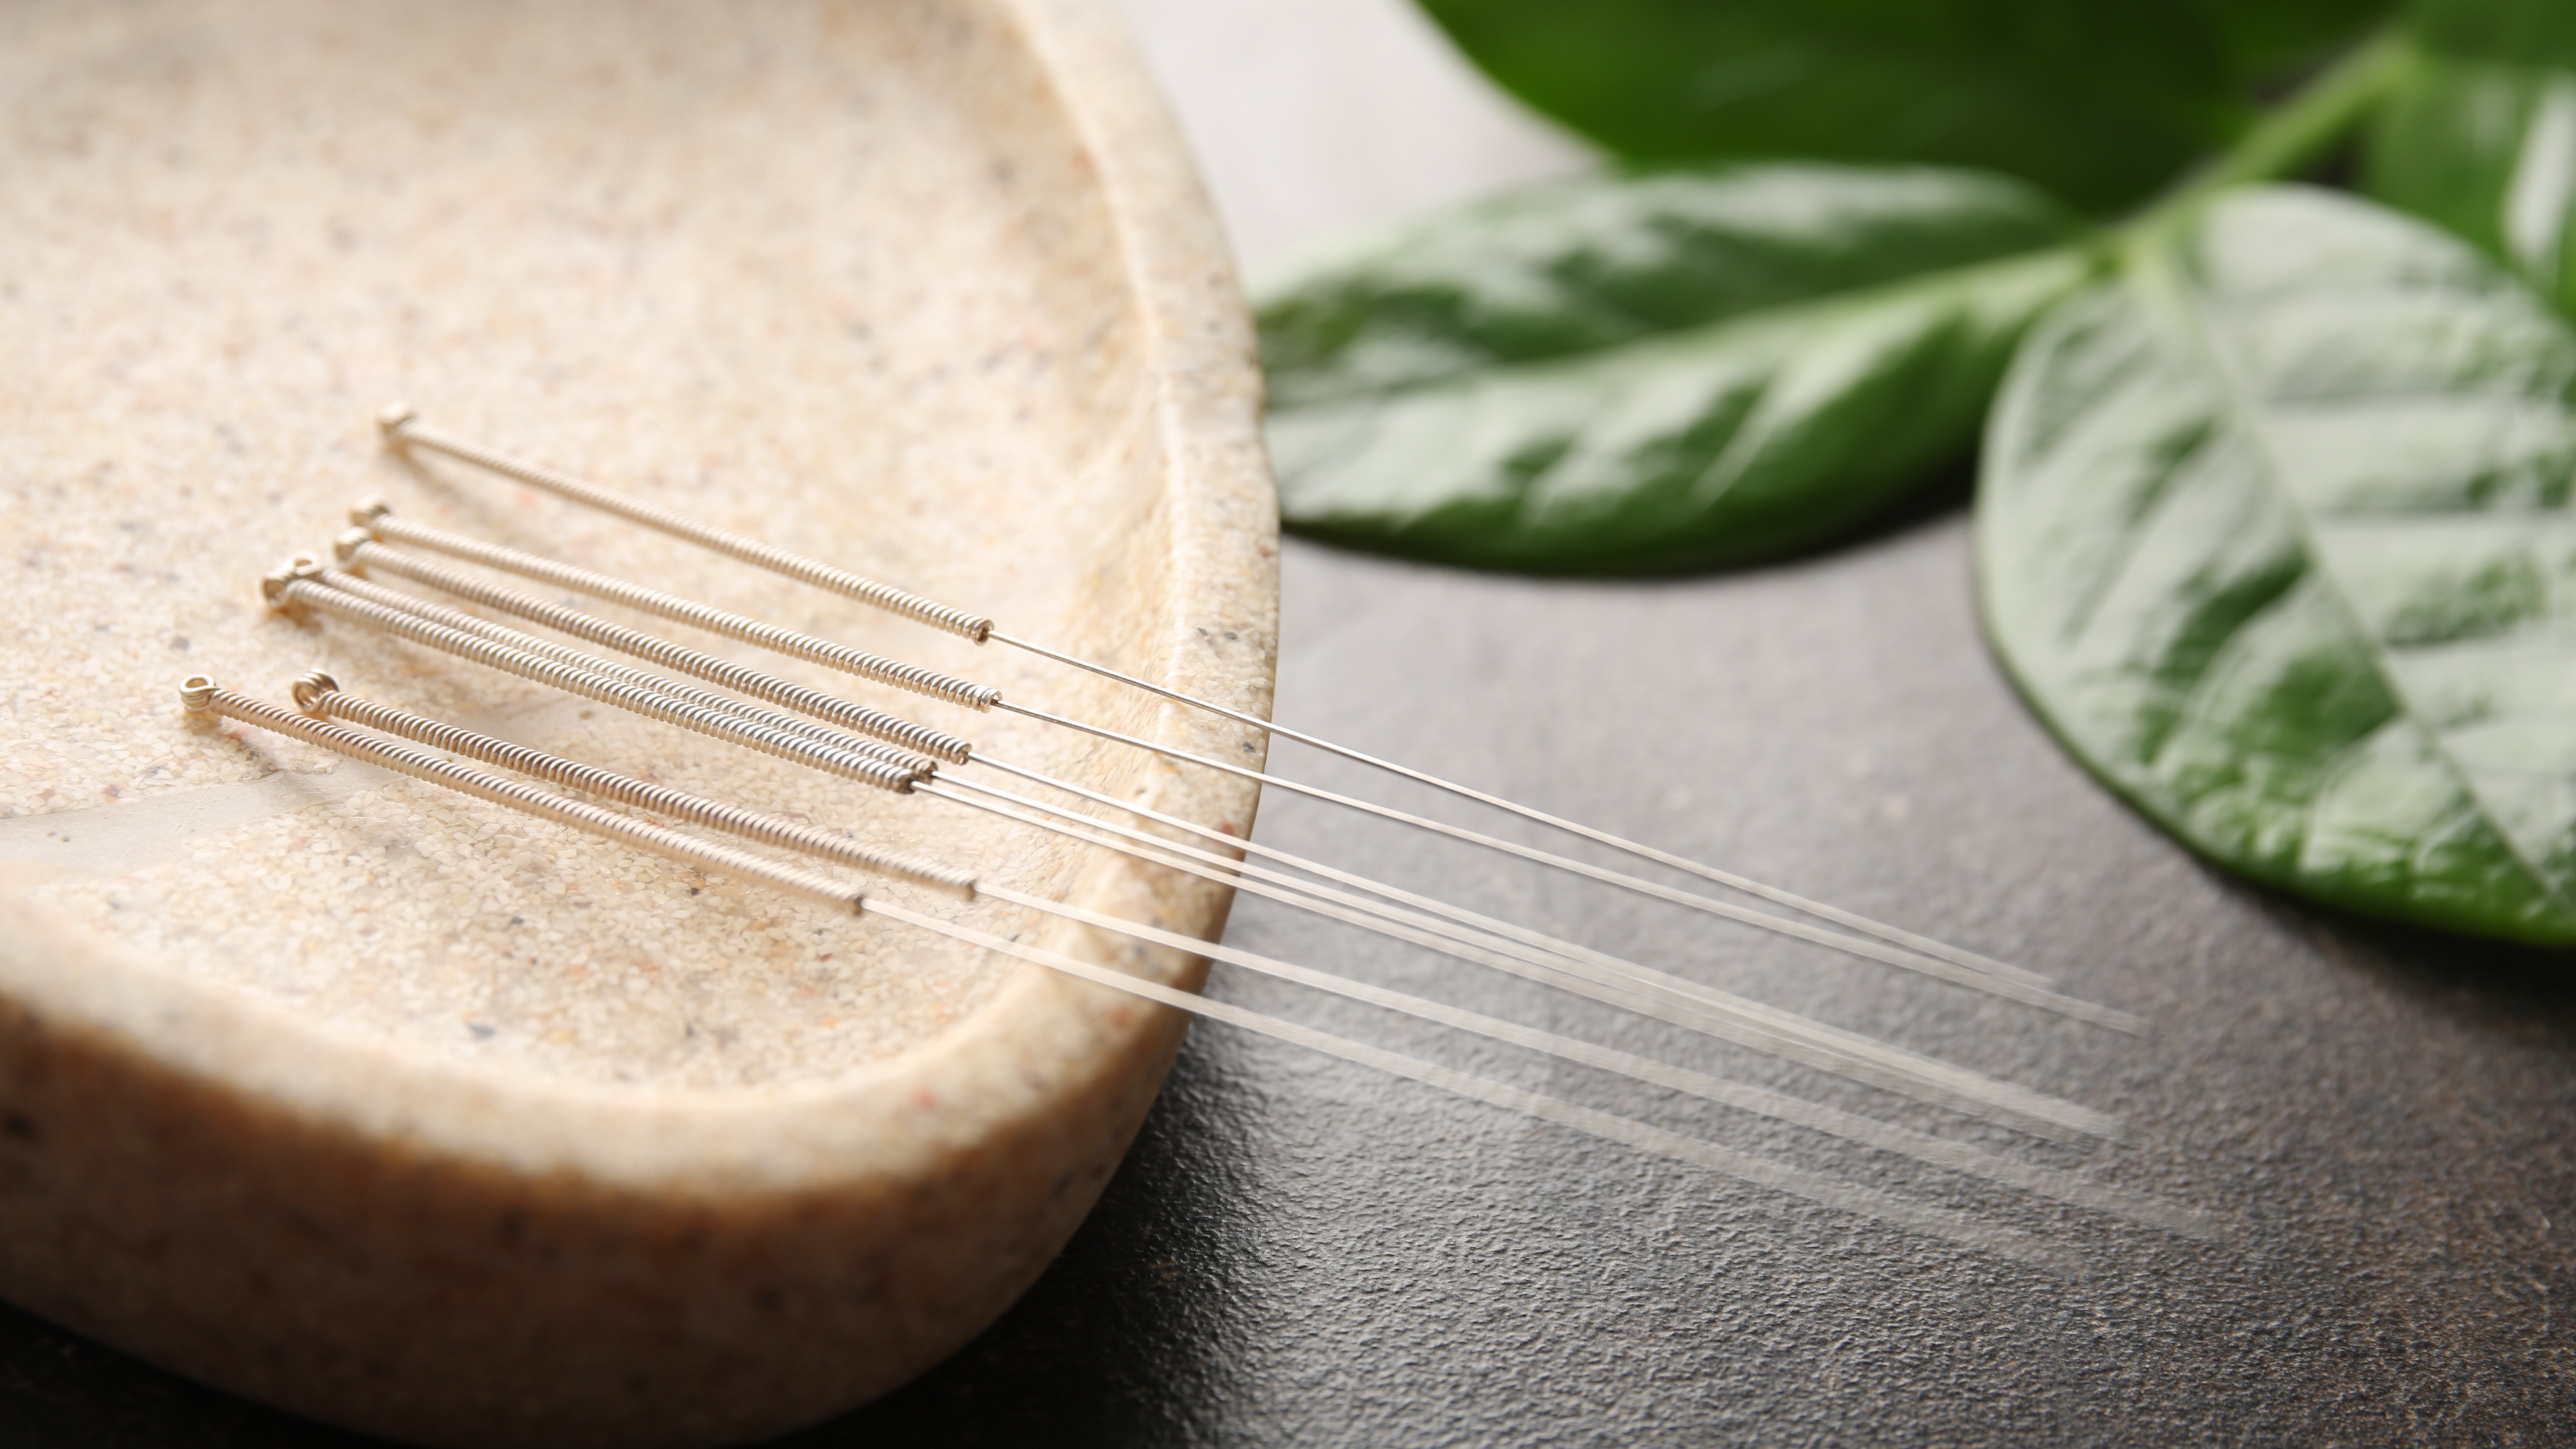 Acupuncture is a very well-known form of energy medicine used across the globe